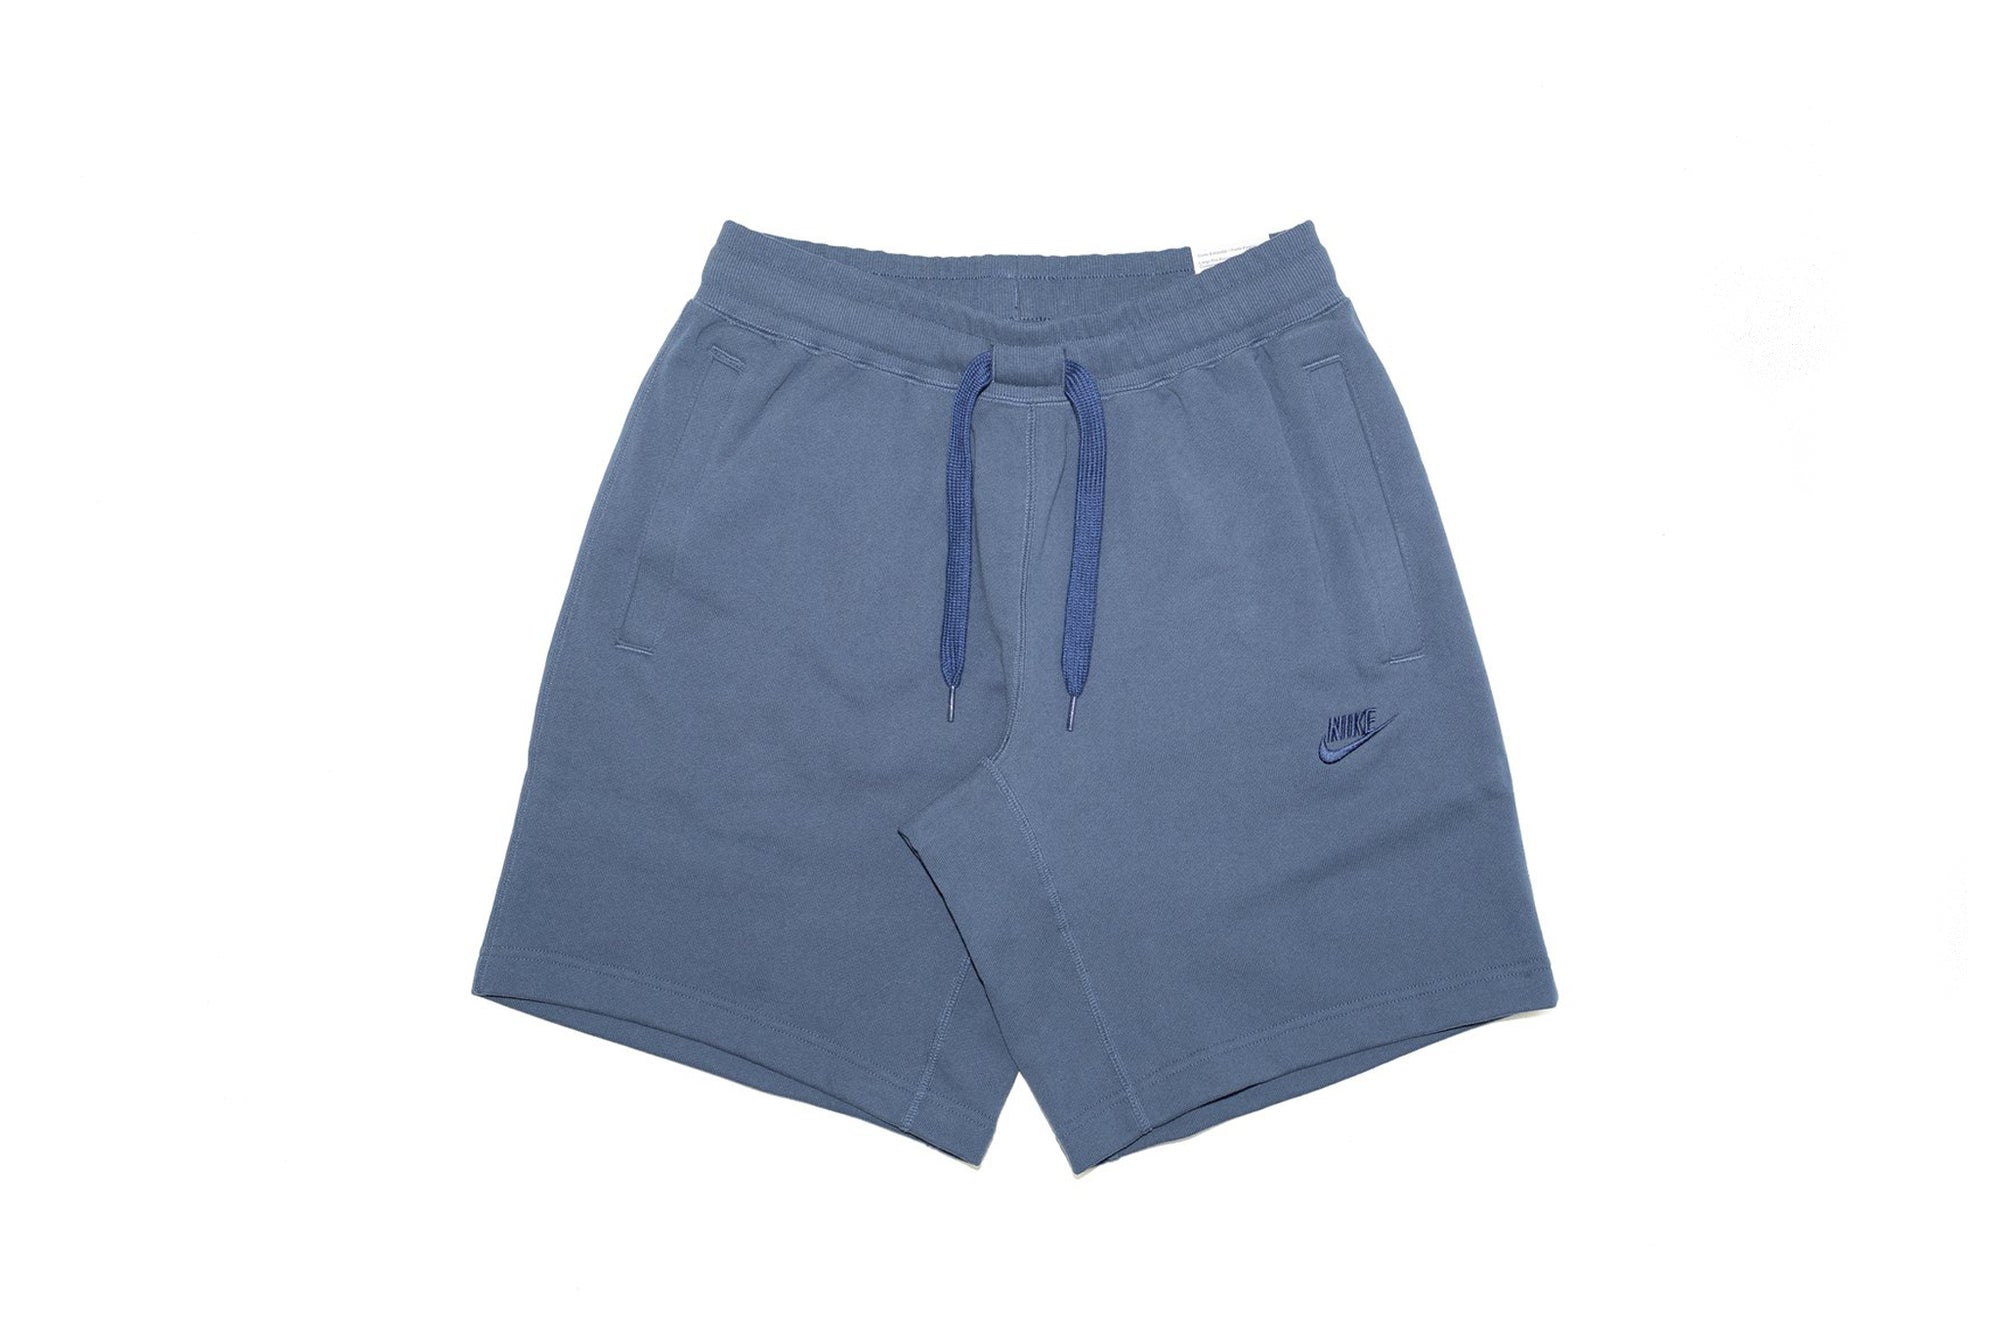 Nike Standard Fit Above Knee Shorts